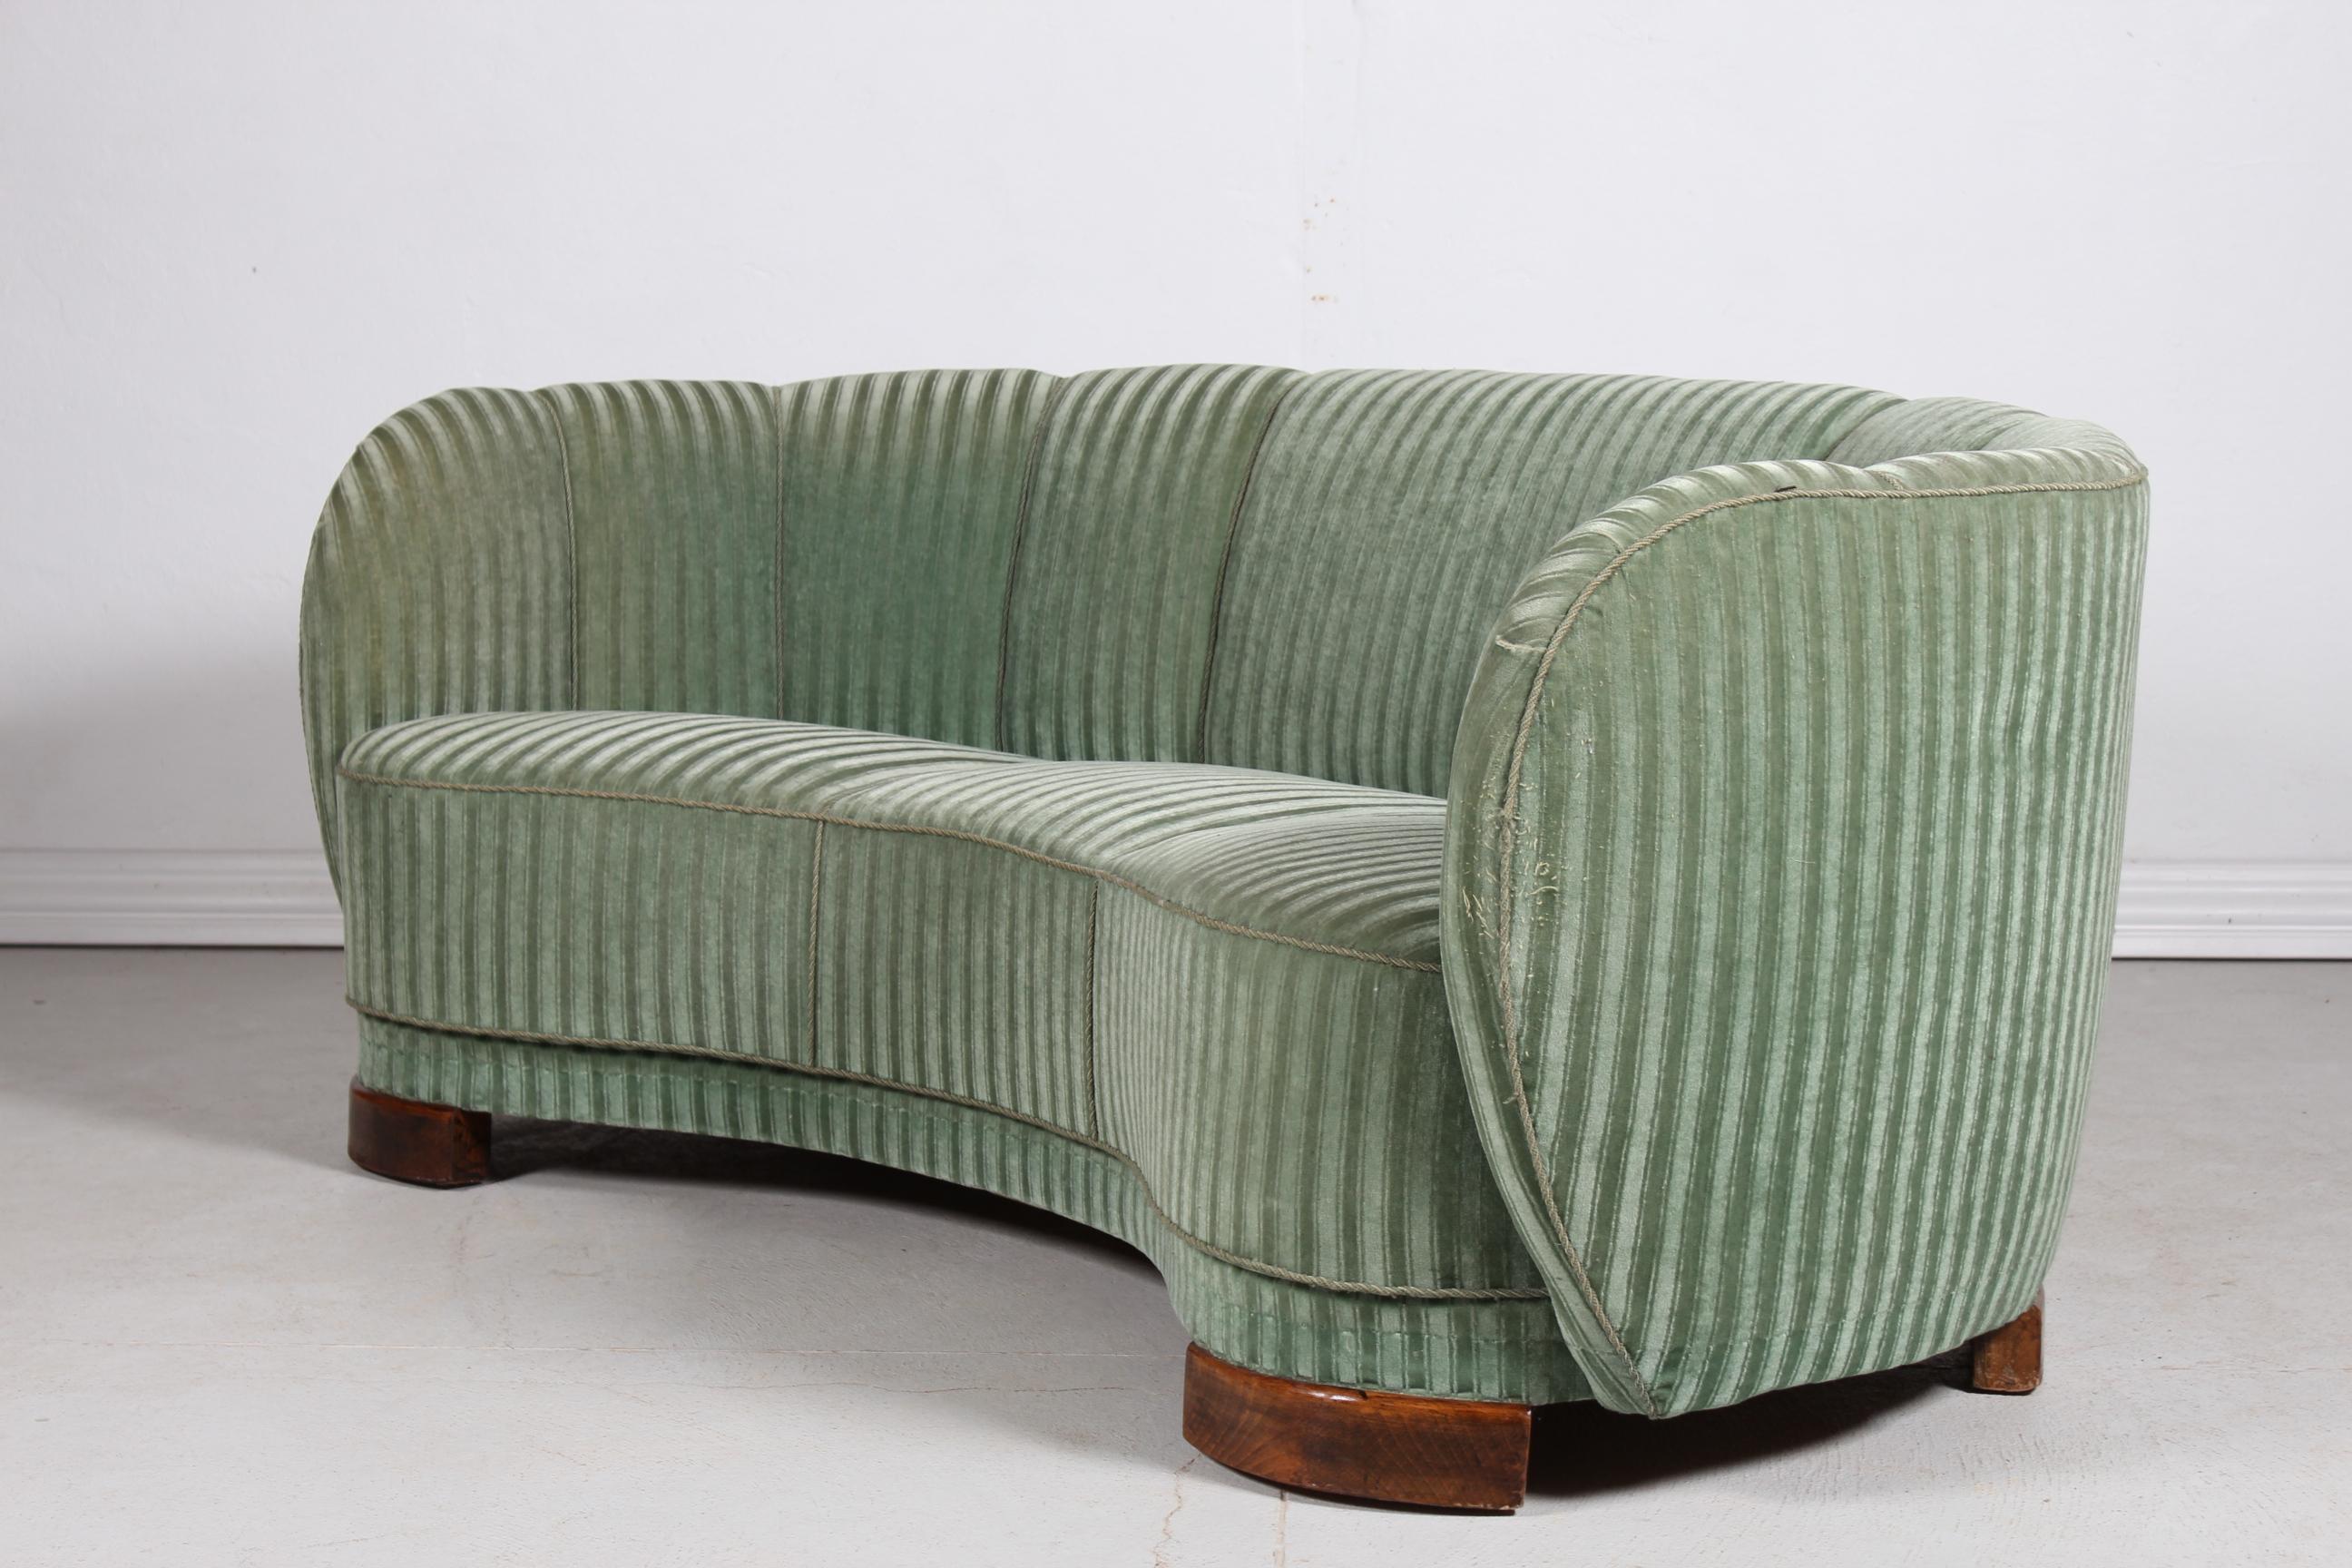 Fabric Danish Art Deco Curved Banana Sofa Upholstered with Green Striped Velour, 1940s